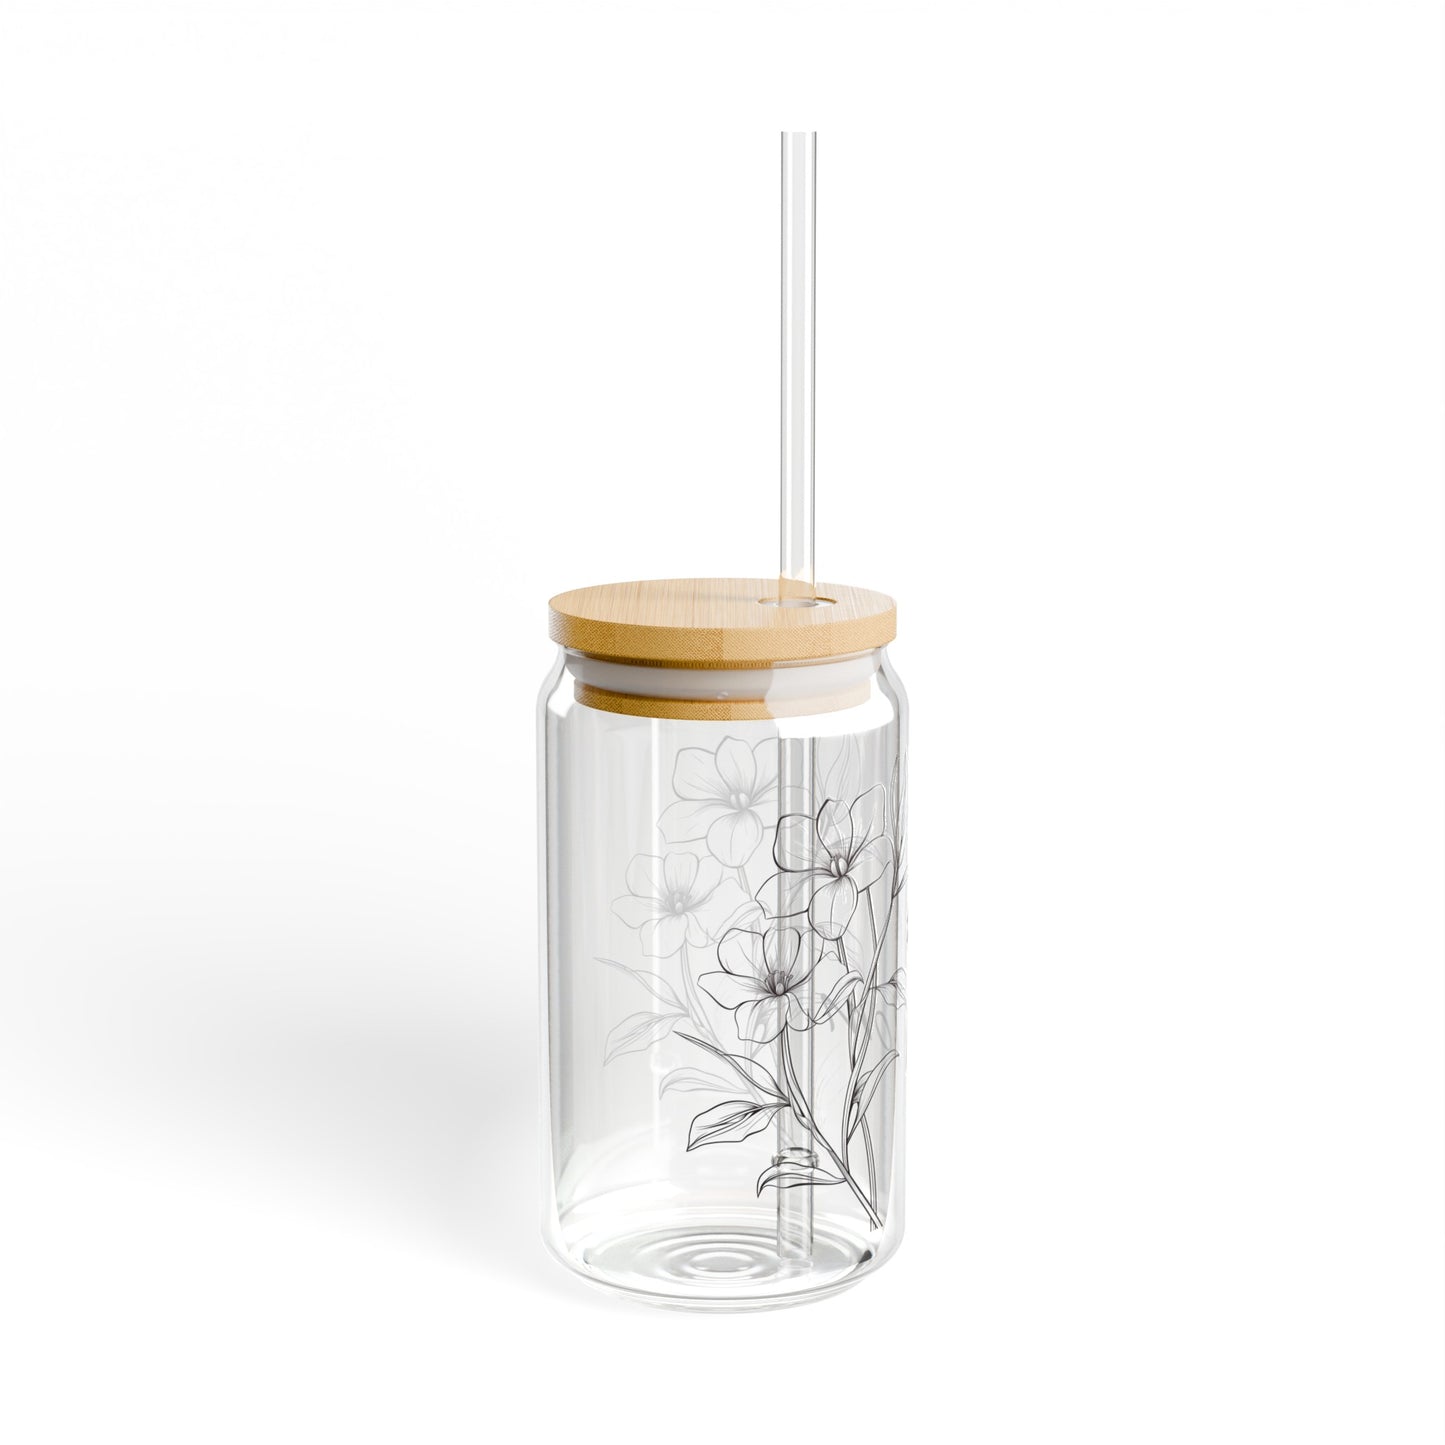 Happy Mother's Day Sipper Glass / Glass Tumbler Transparent Floral Pattern and Flowers - "#1 Mom", Number 1 Mom / No. 1 Mom 16oz (0,473 l) - Perfect Gift